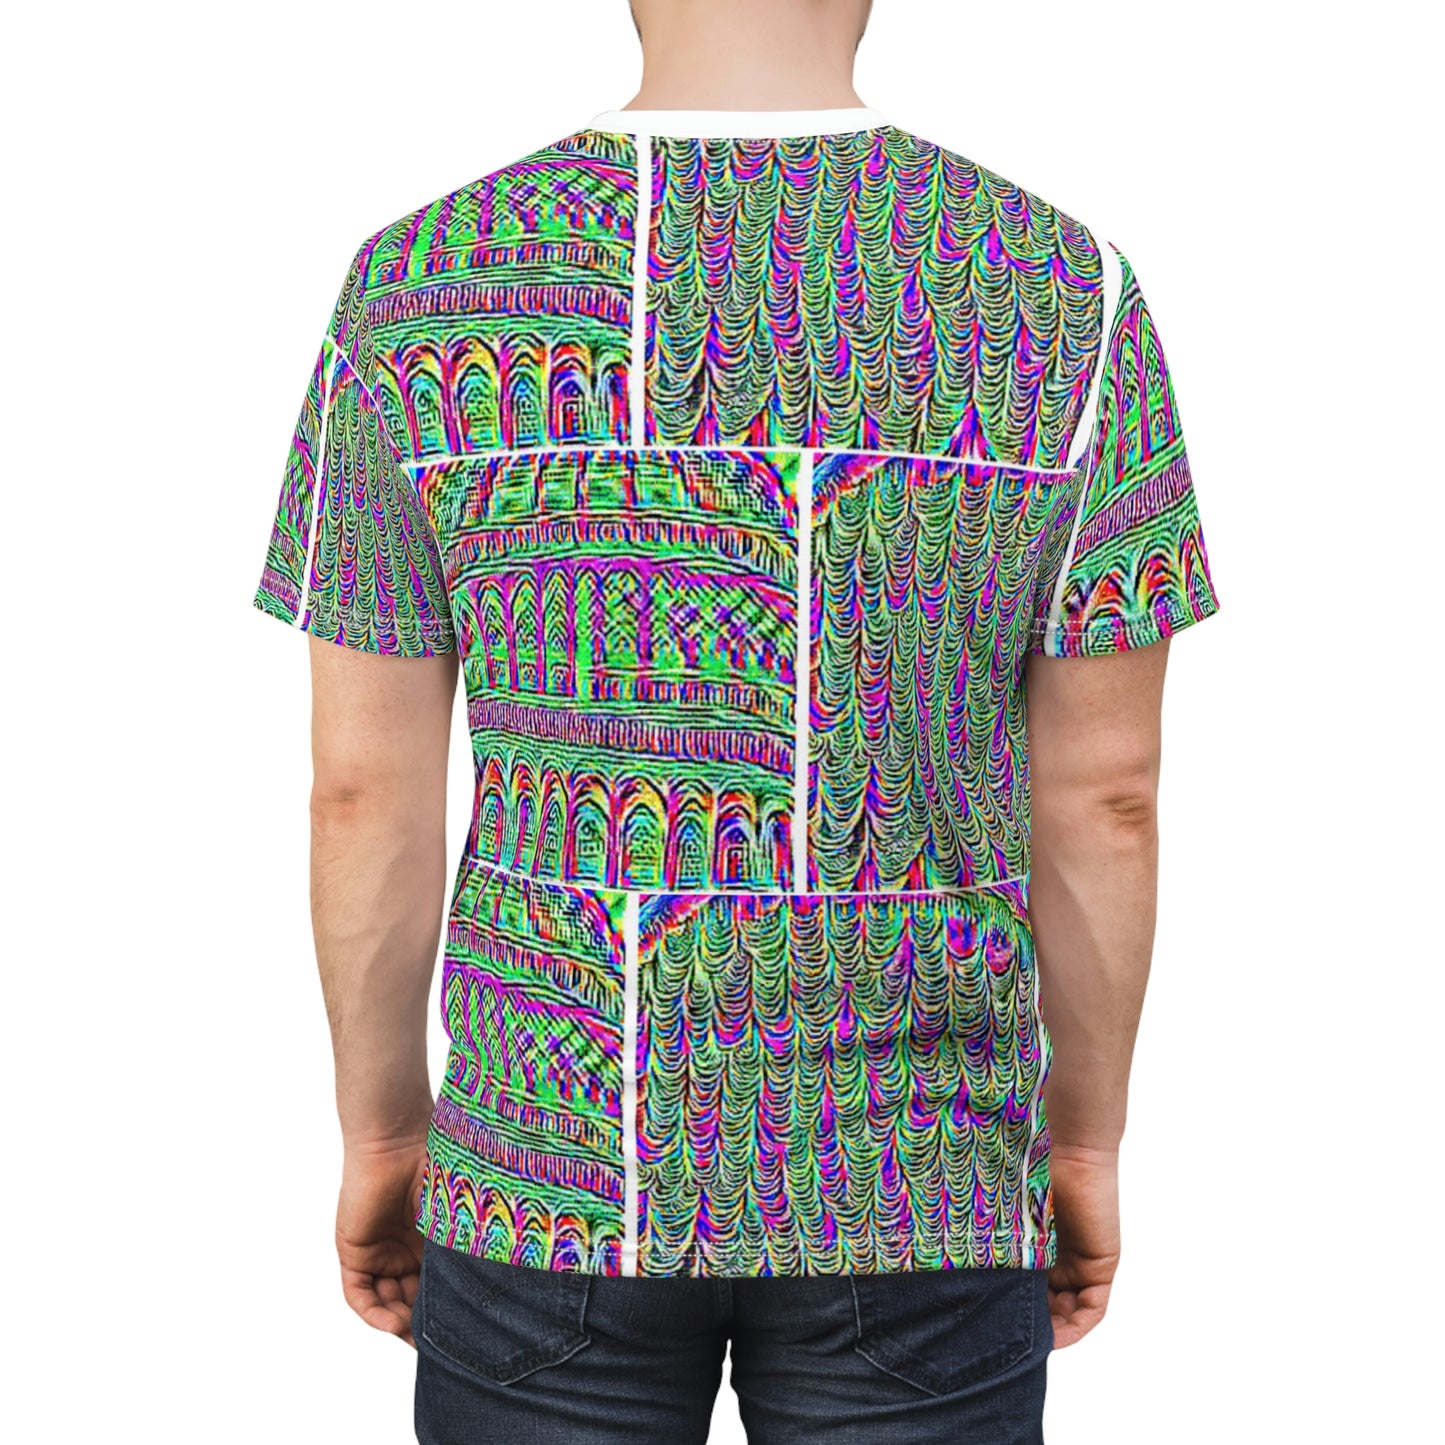 Anti Facial Recognition / AI Invisibility / Adversarial Pattern Unisex Tee